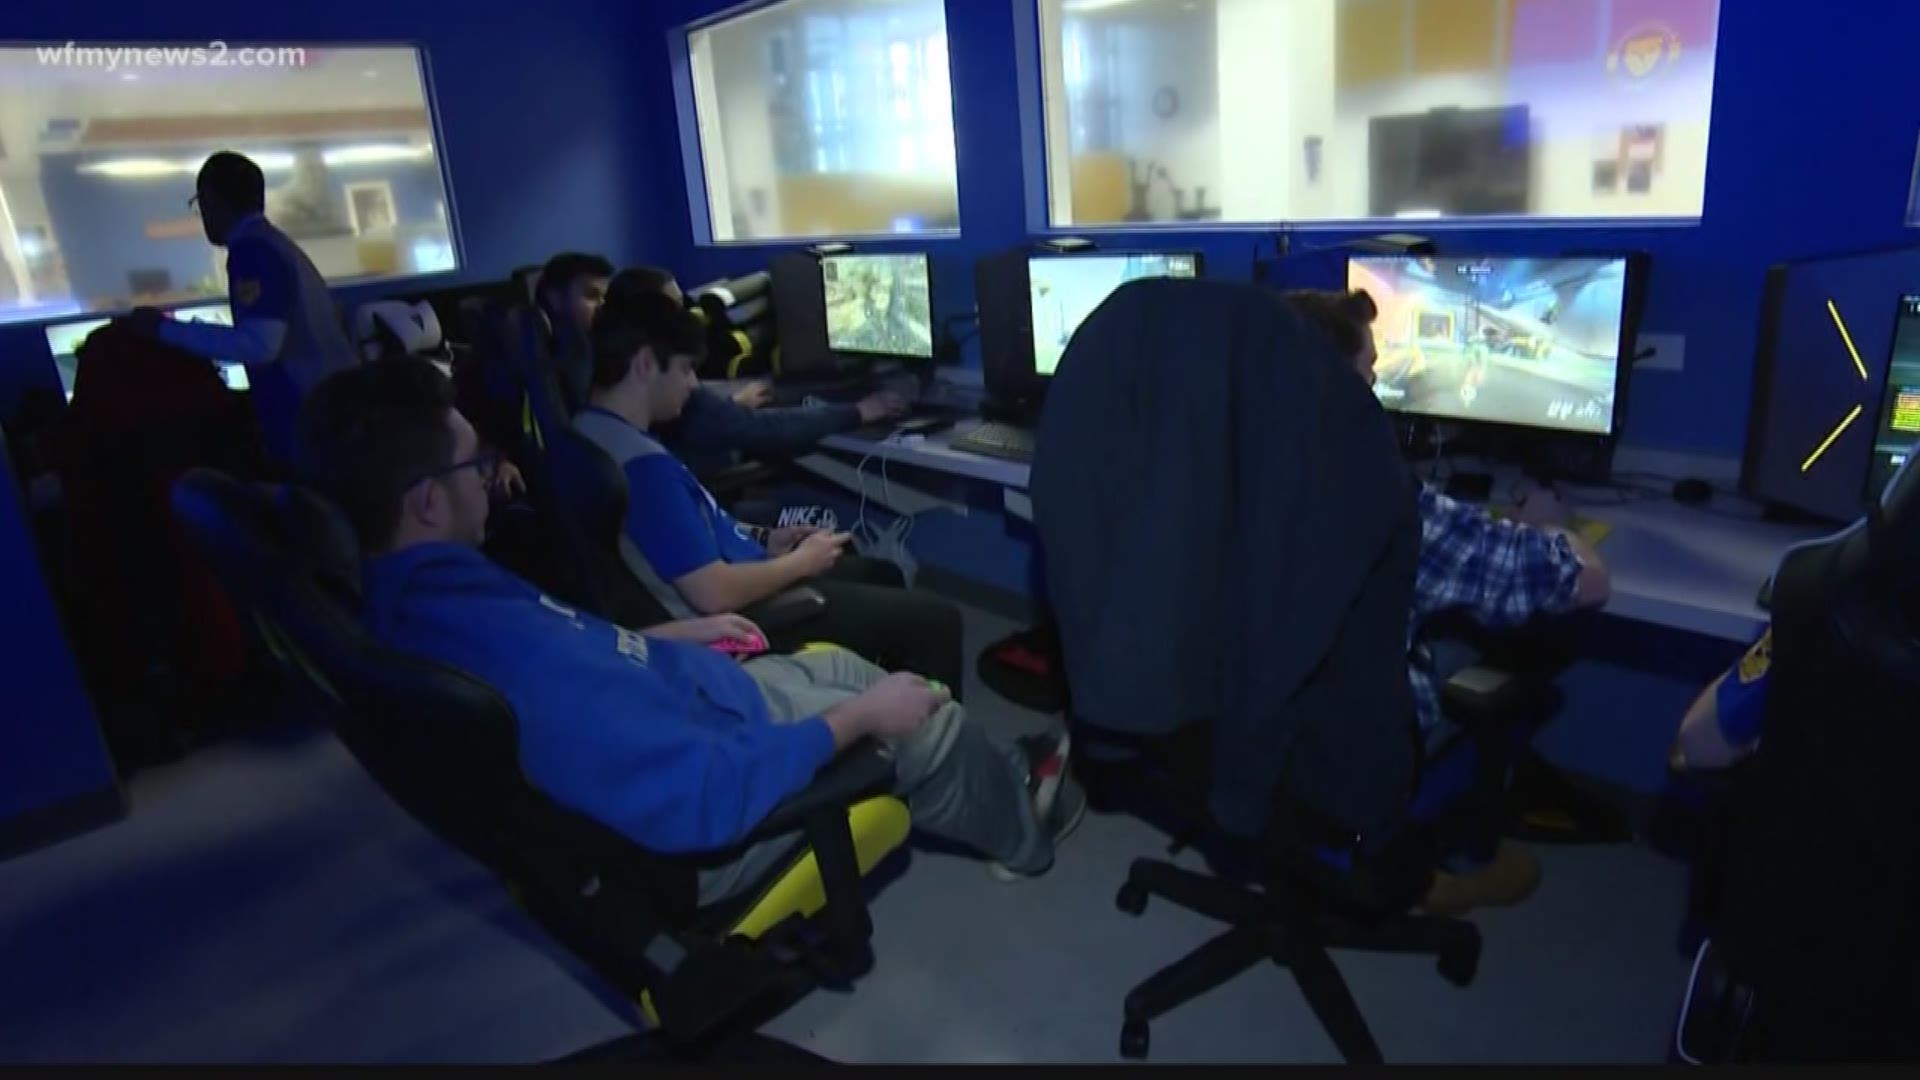 A growing number of colleges and universities are offering teams to play ESports. Now some doctors are calling for the gamers to be treated like other college athletes because just like with other sports, they also suffer injuries.